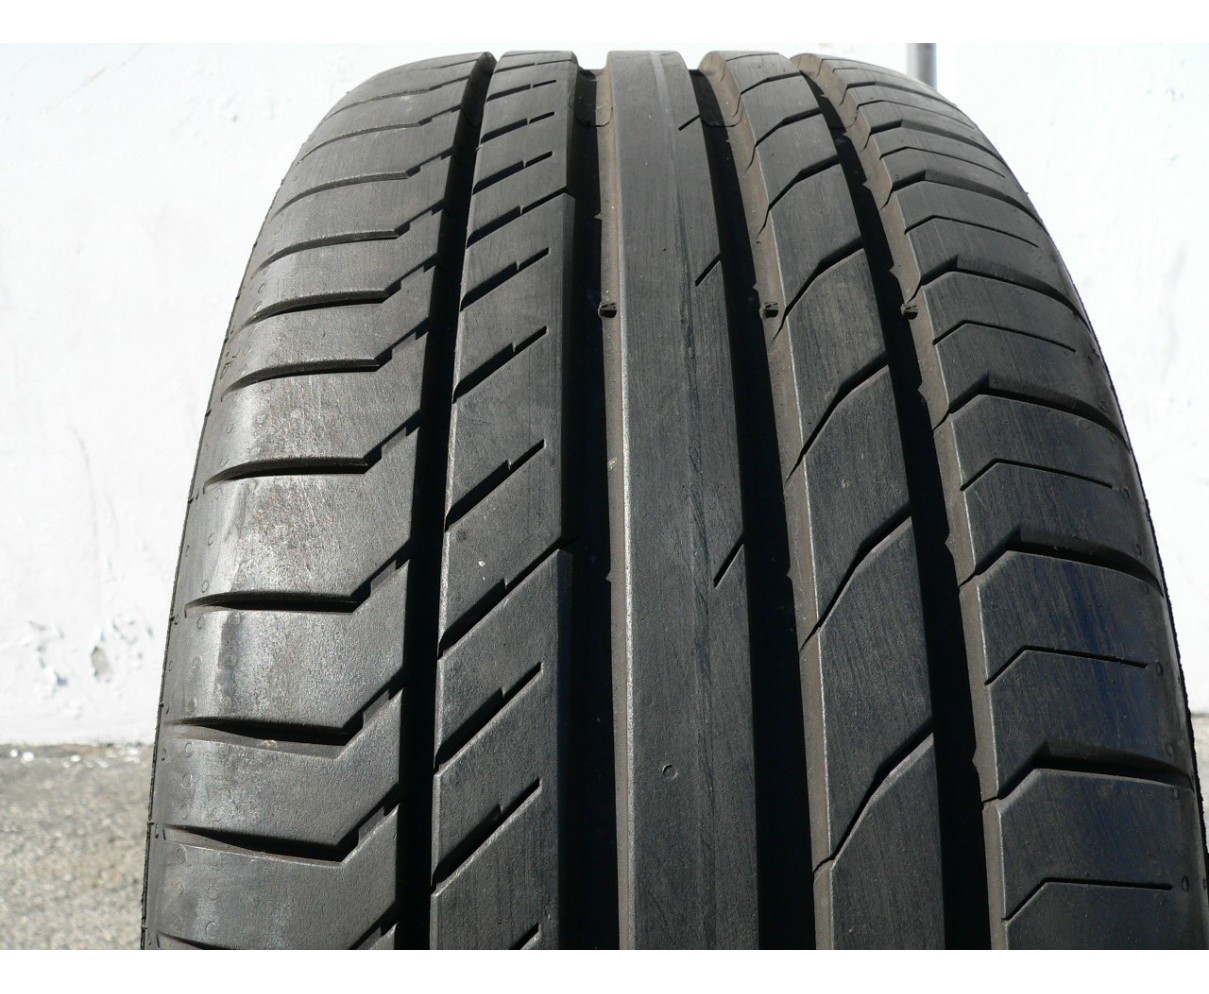 used Run tires Continental Flat 90% 4 ContiSportContact 235 95V life 45 19 5